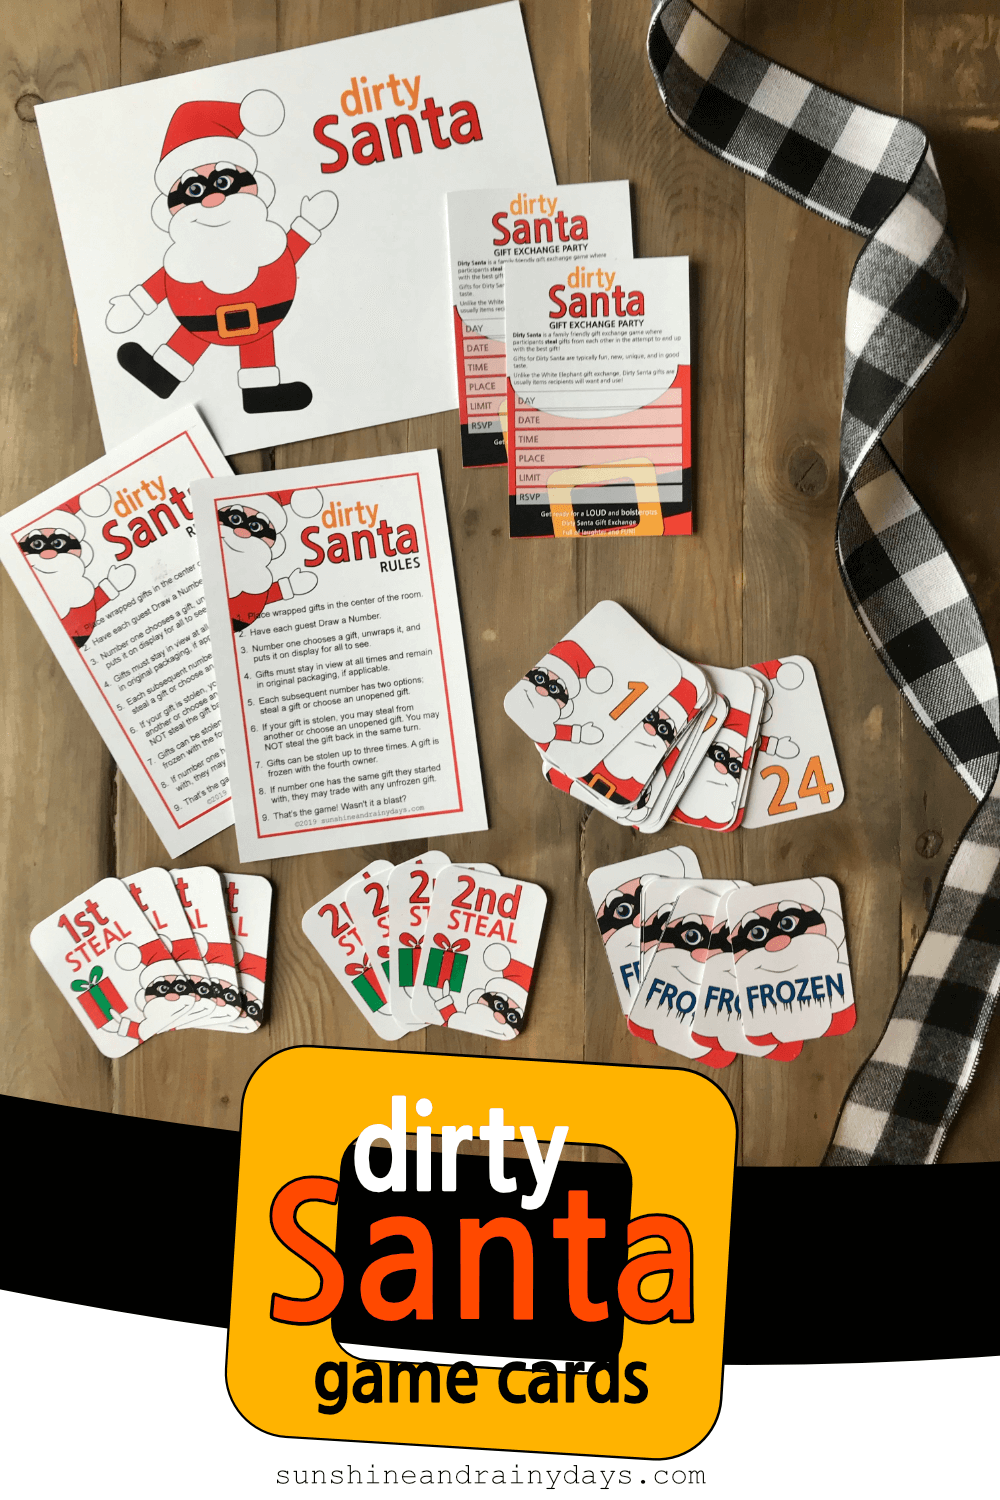 dirty-santa-invites-rules-and-game-cards-pdf-sunshine-and-rainy-days